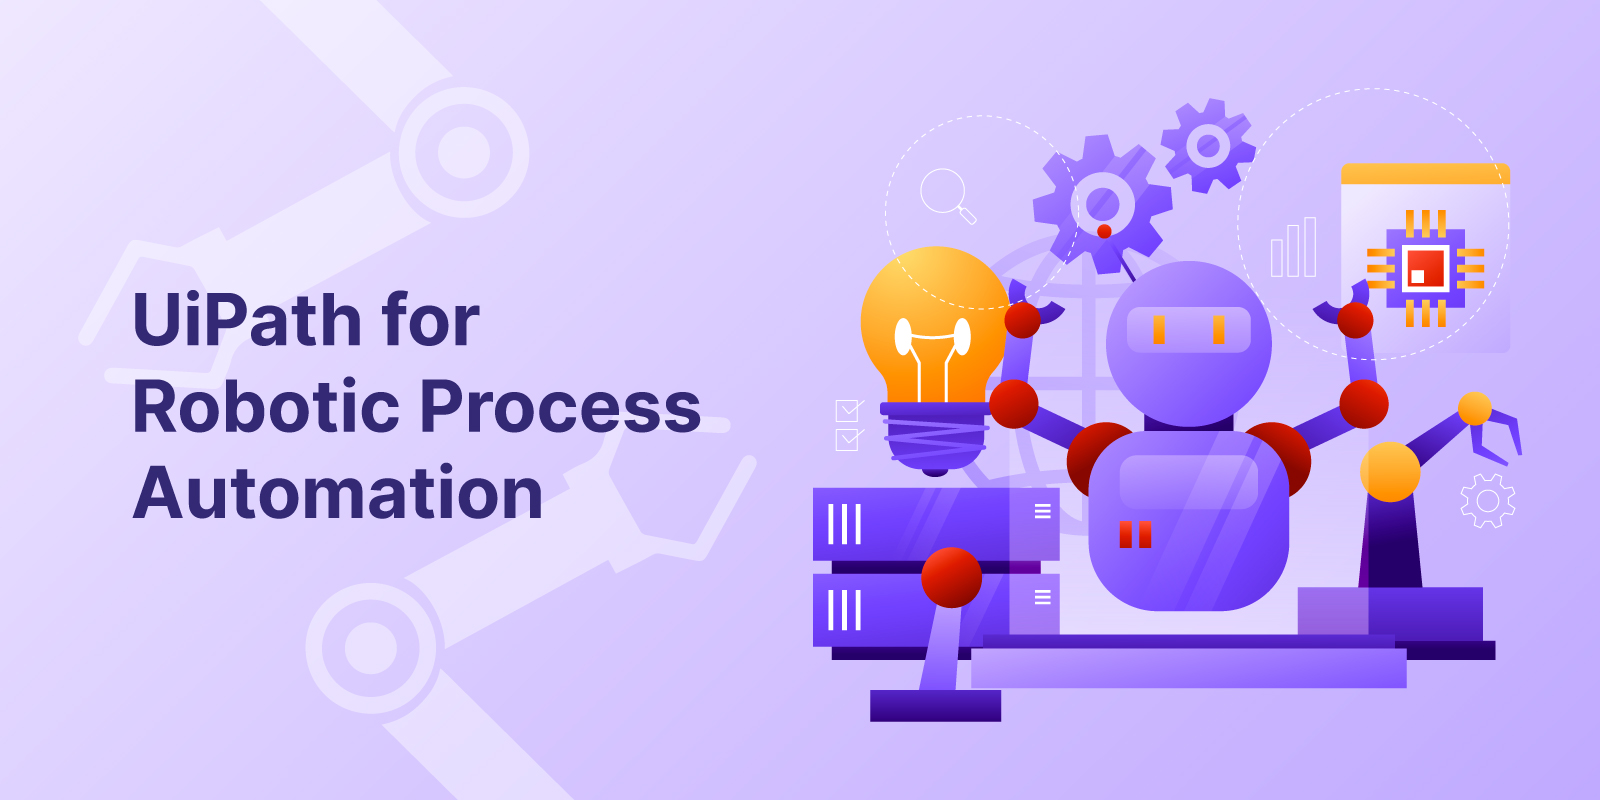 UiPath for Robotic Process Automation